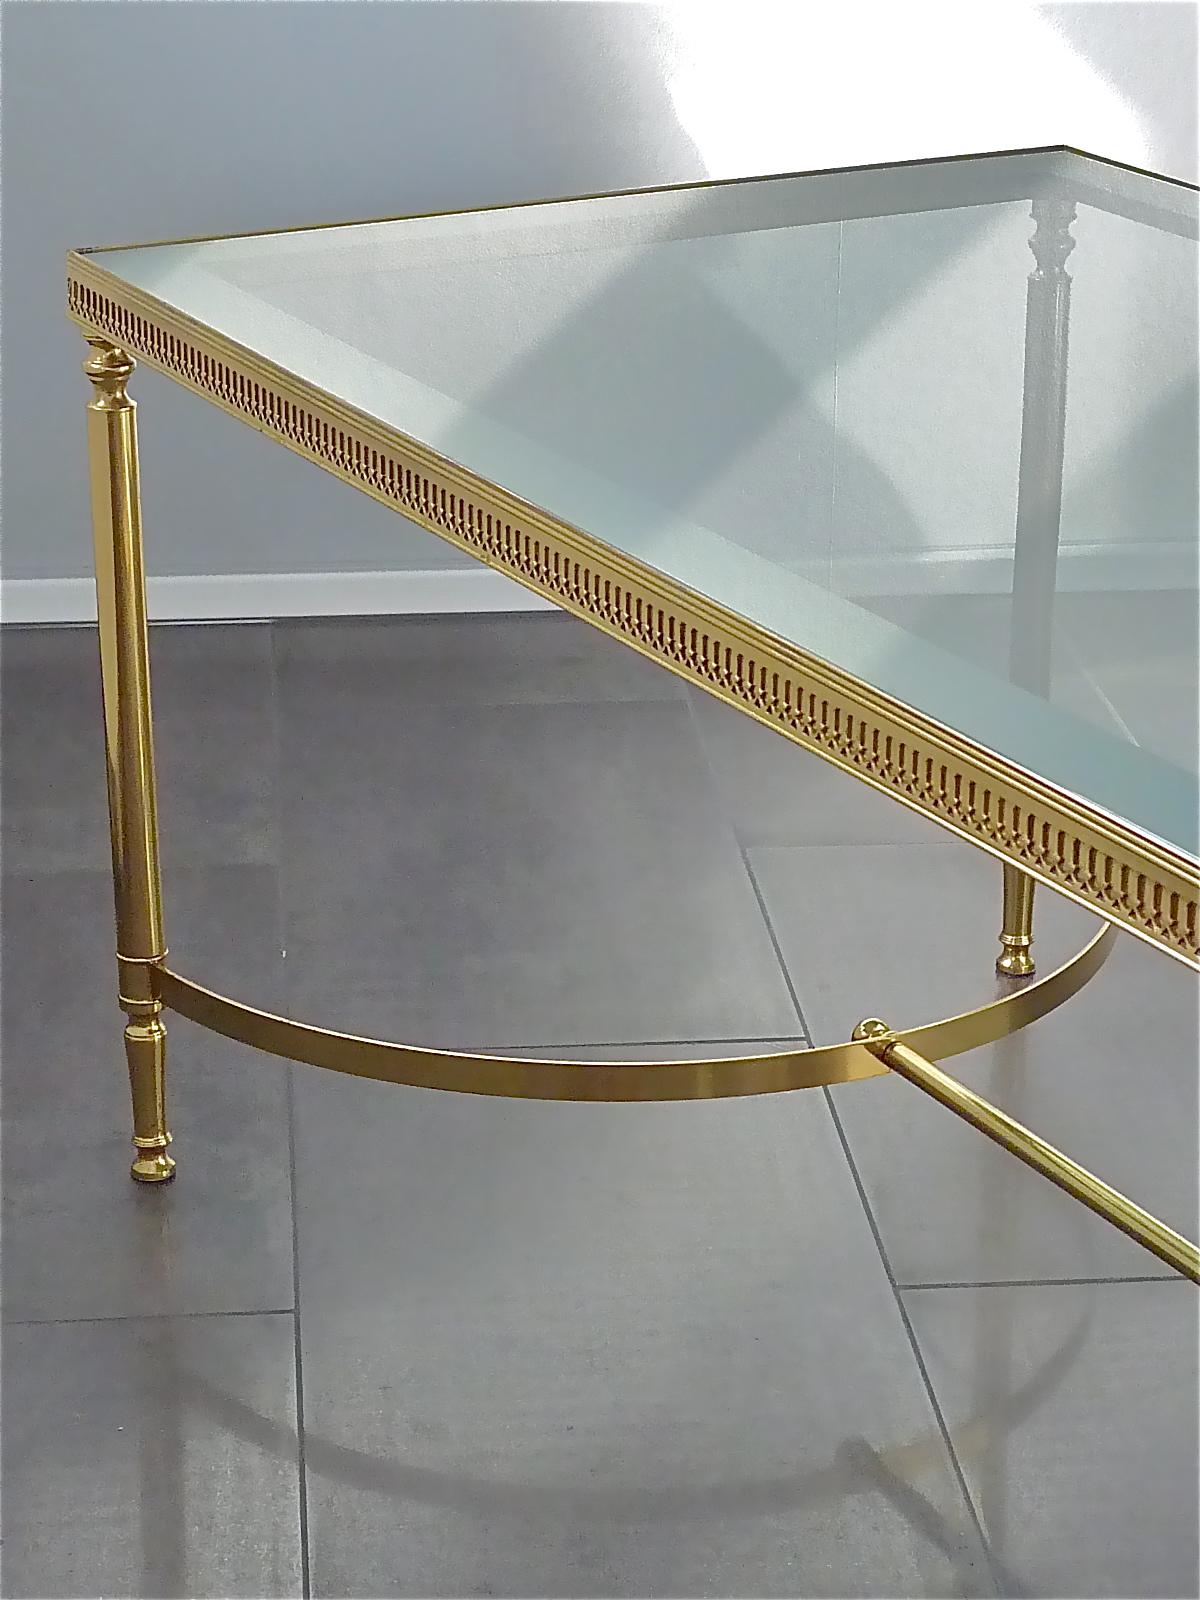 French Midcentury Maison Baguès Jansen Couch Sofa Table Brass Mirror Glass 1950s For Sale 8